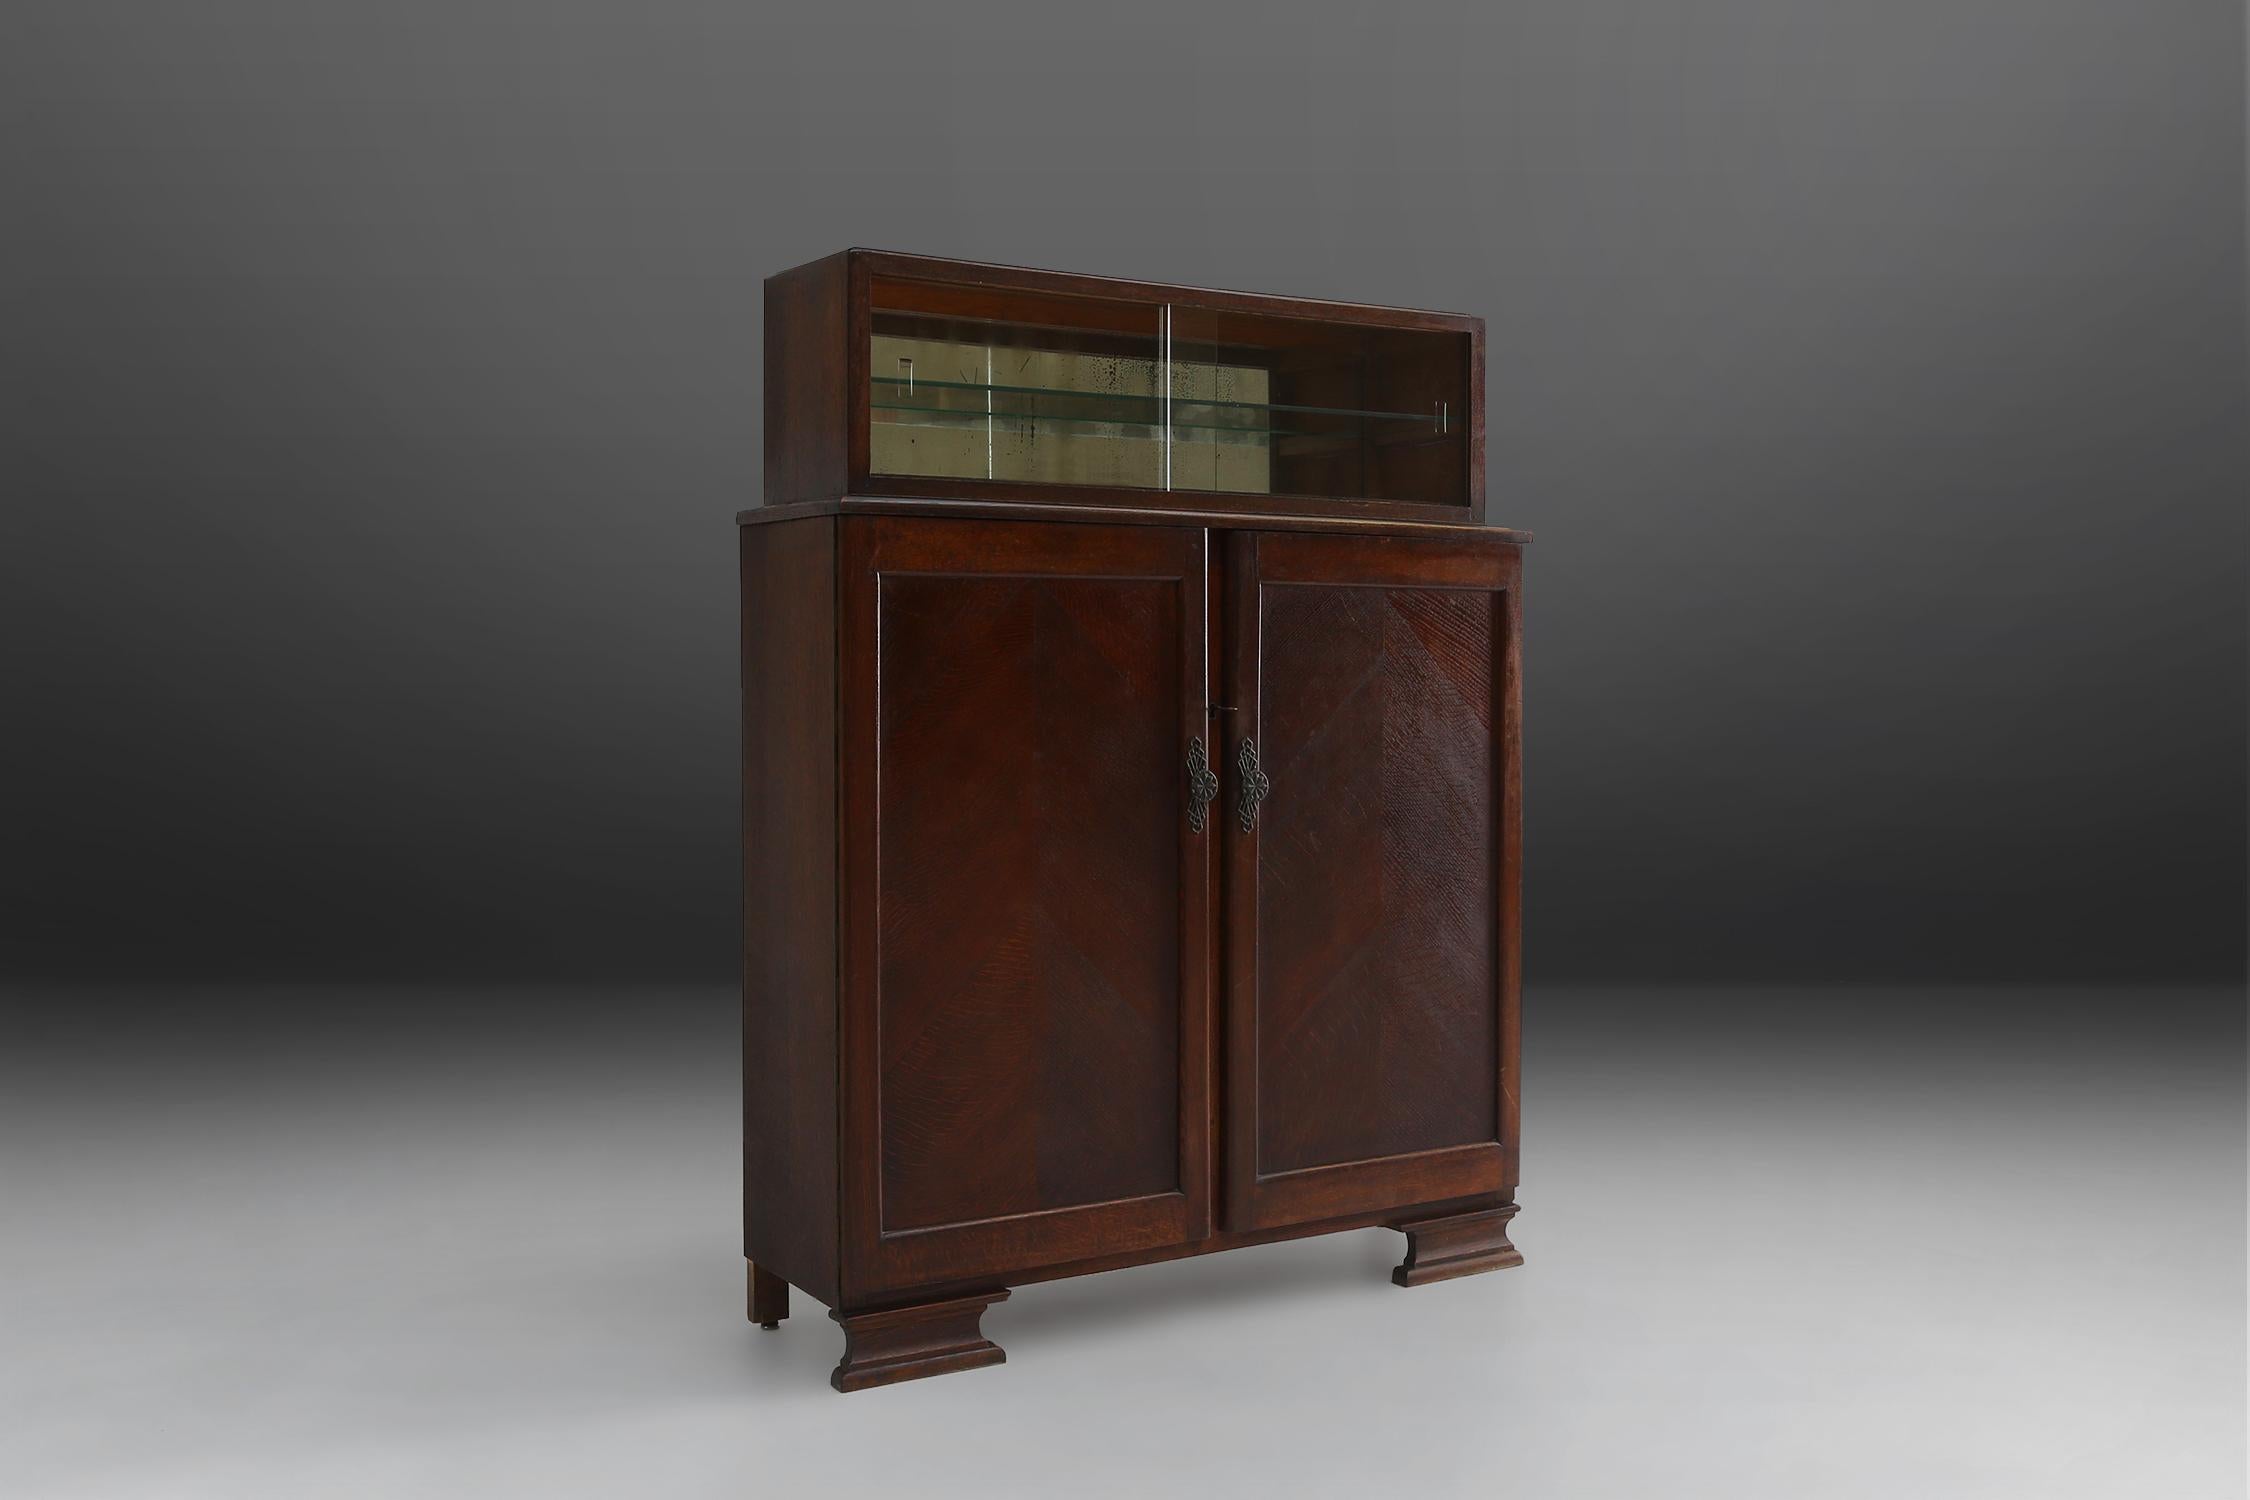 Art Deco cabinet with a vitrine on top with mirrored glass. Made of wood in the 1930s.